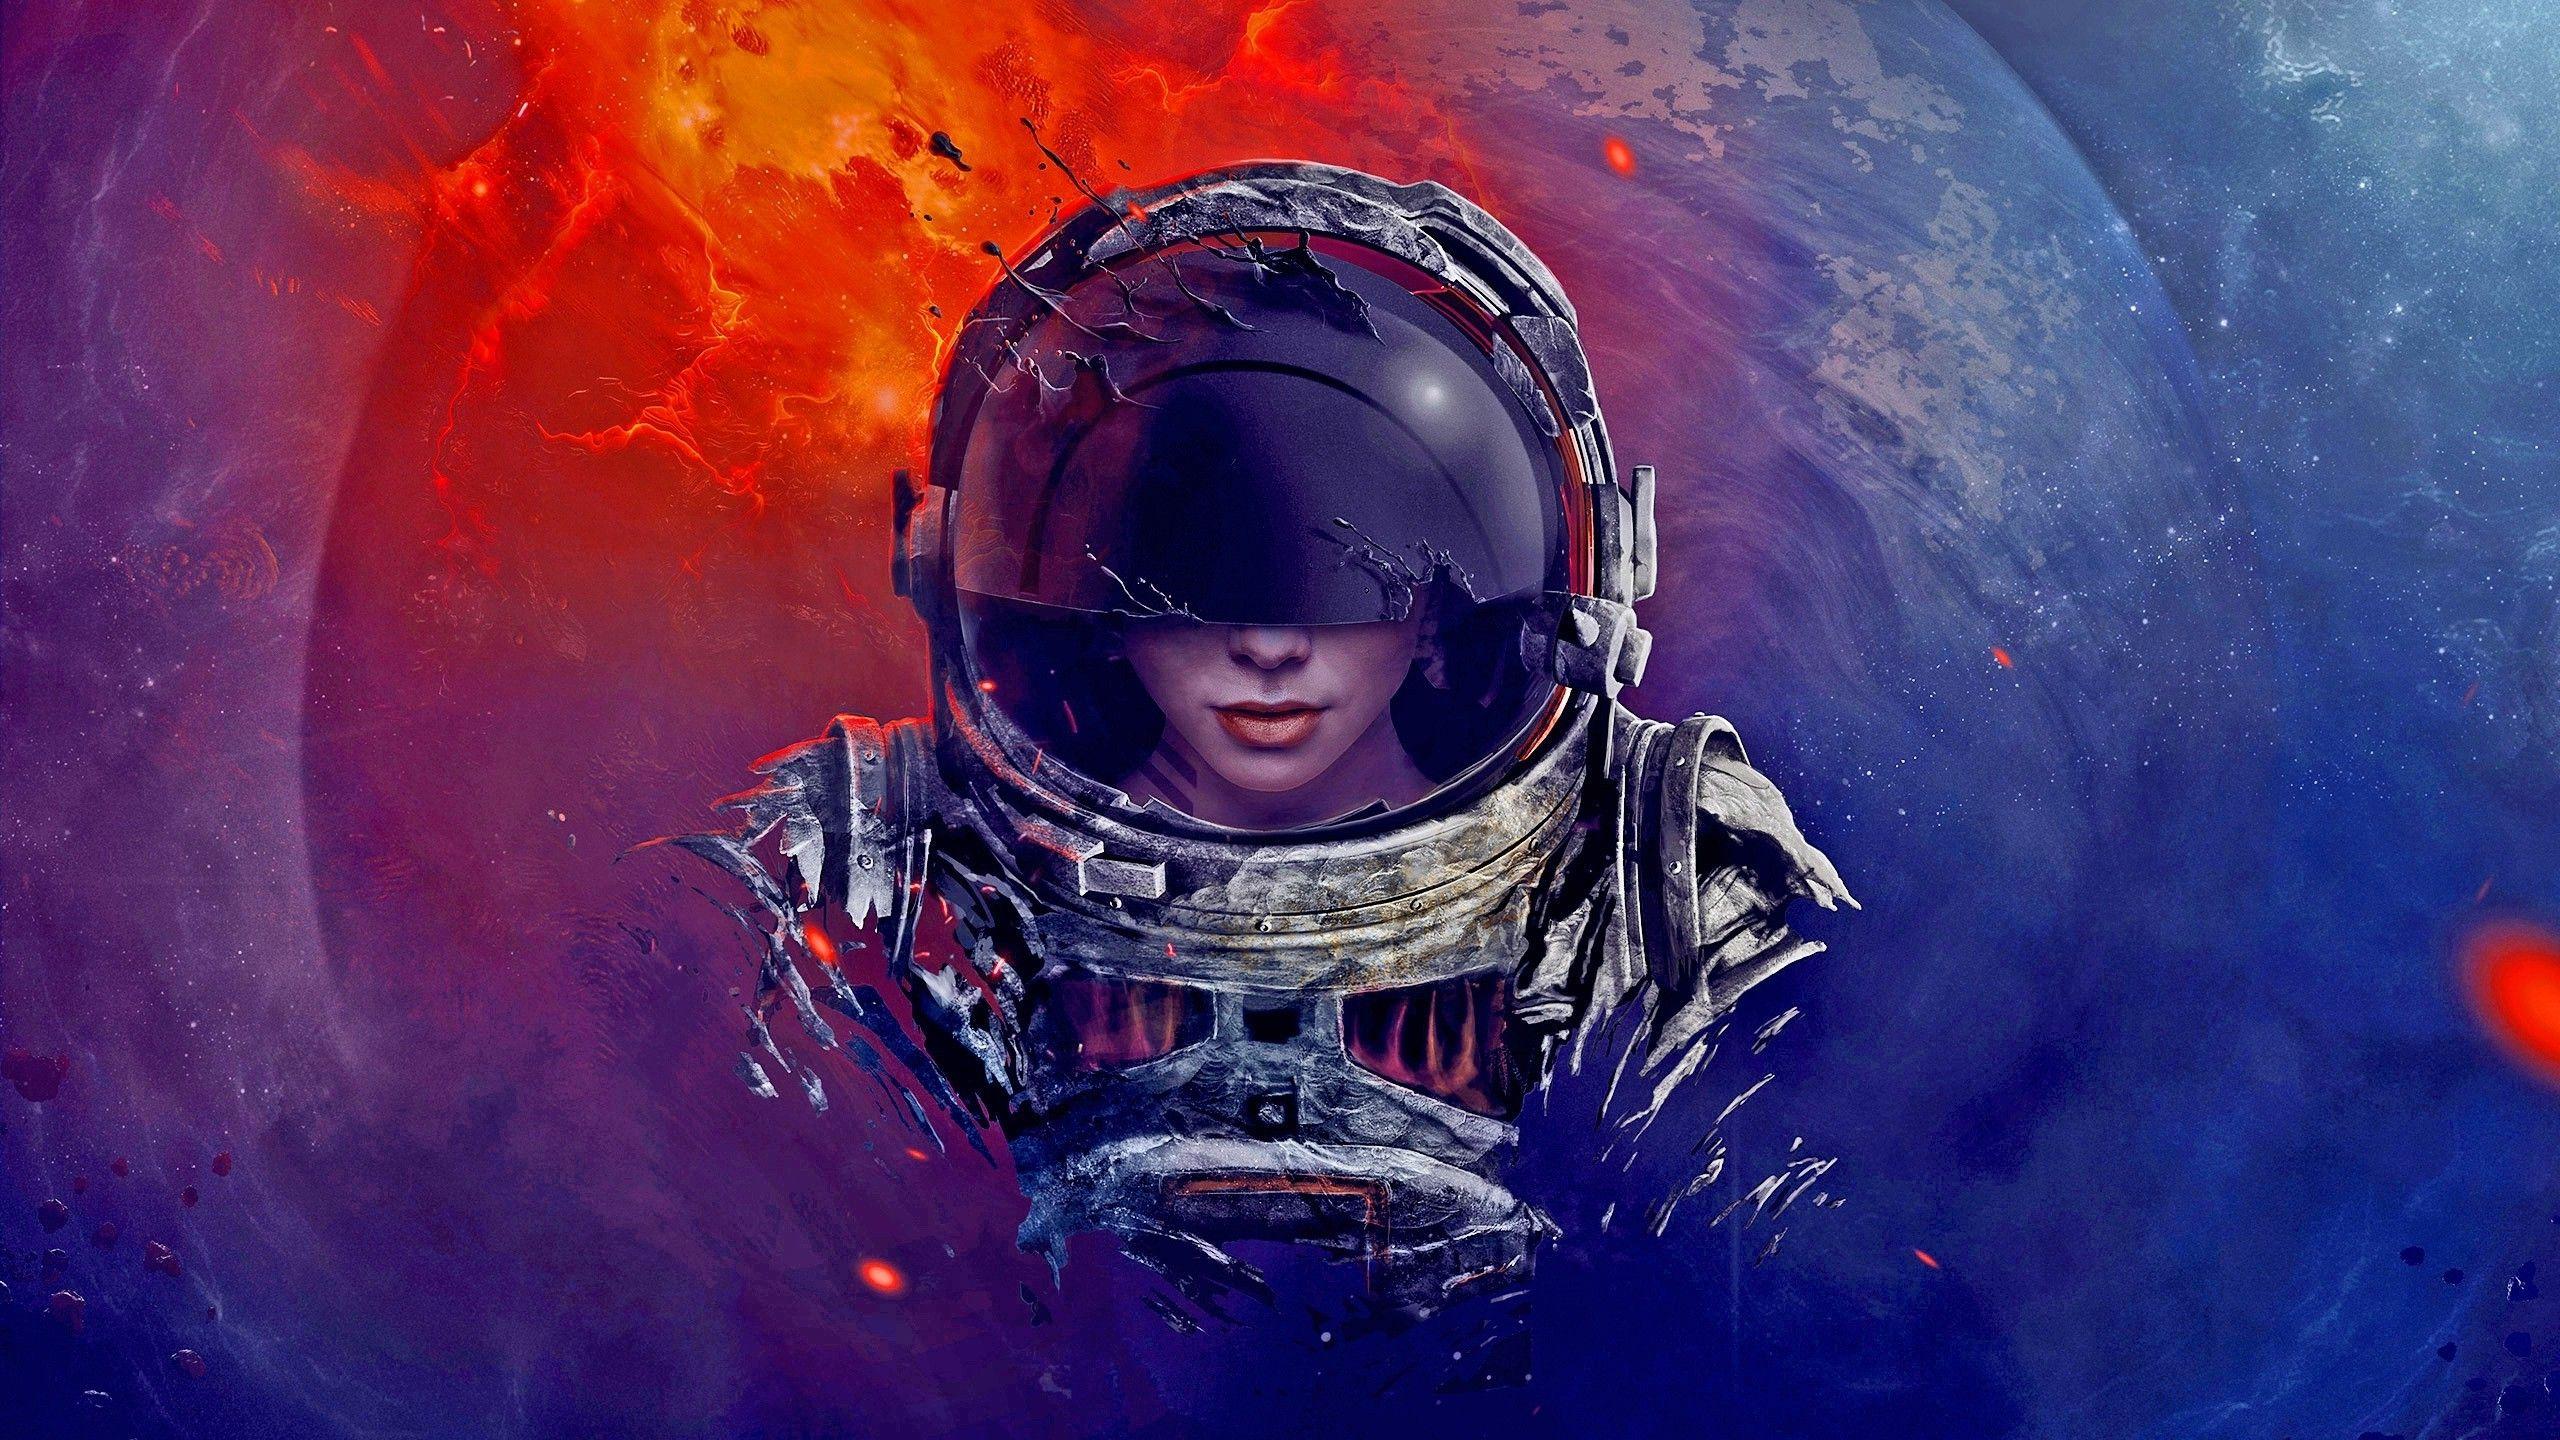 Female Astronaut Wallpapers Top Free Female Astronaut Backgrounds Wallpaperaccess 7383